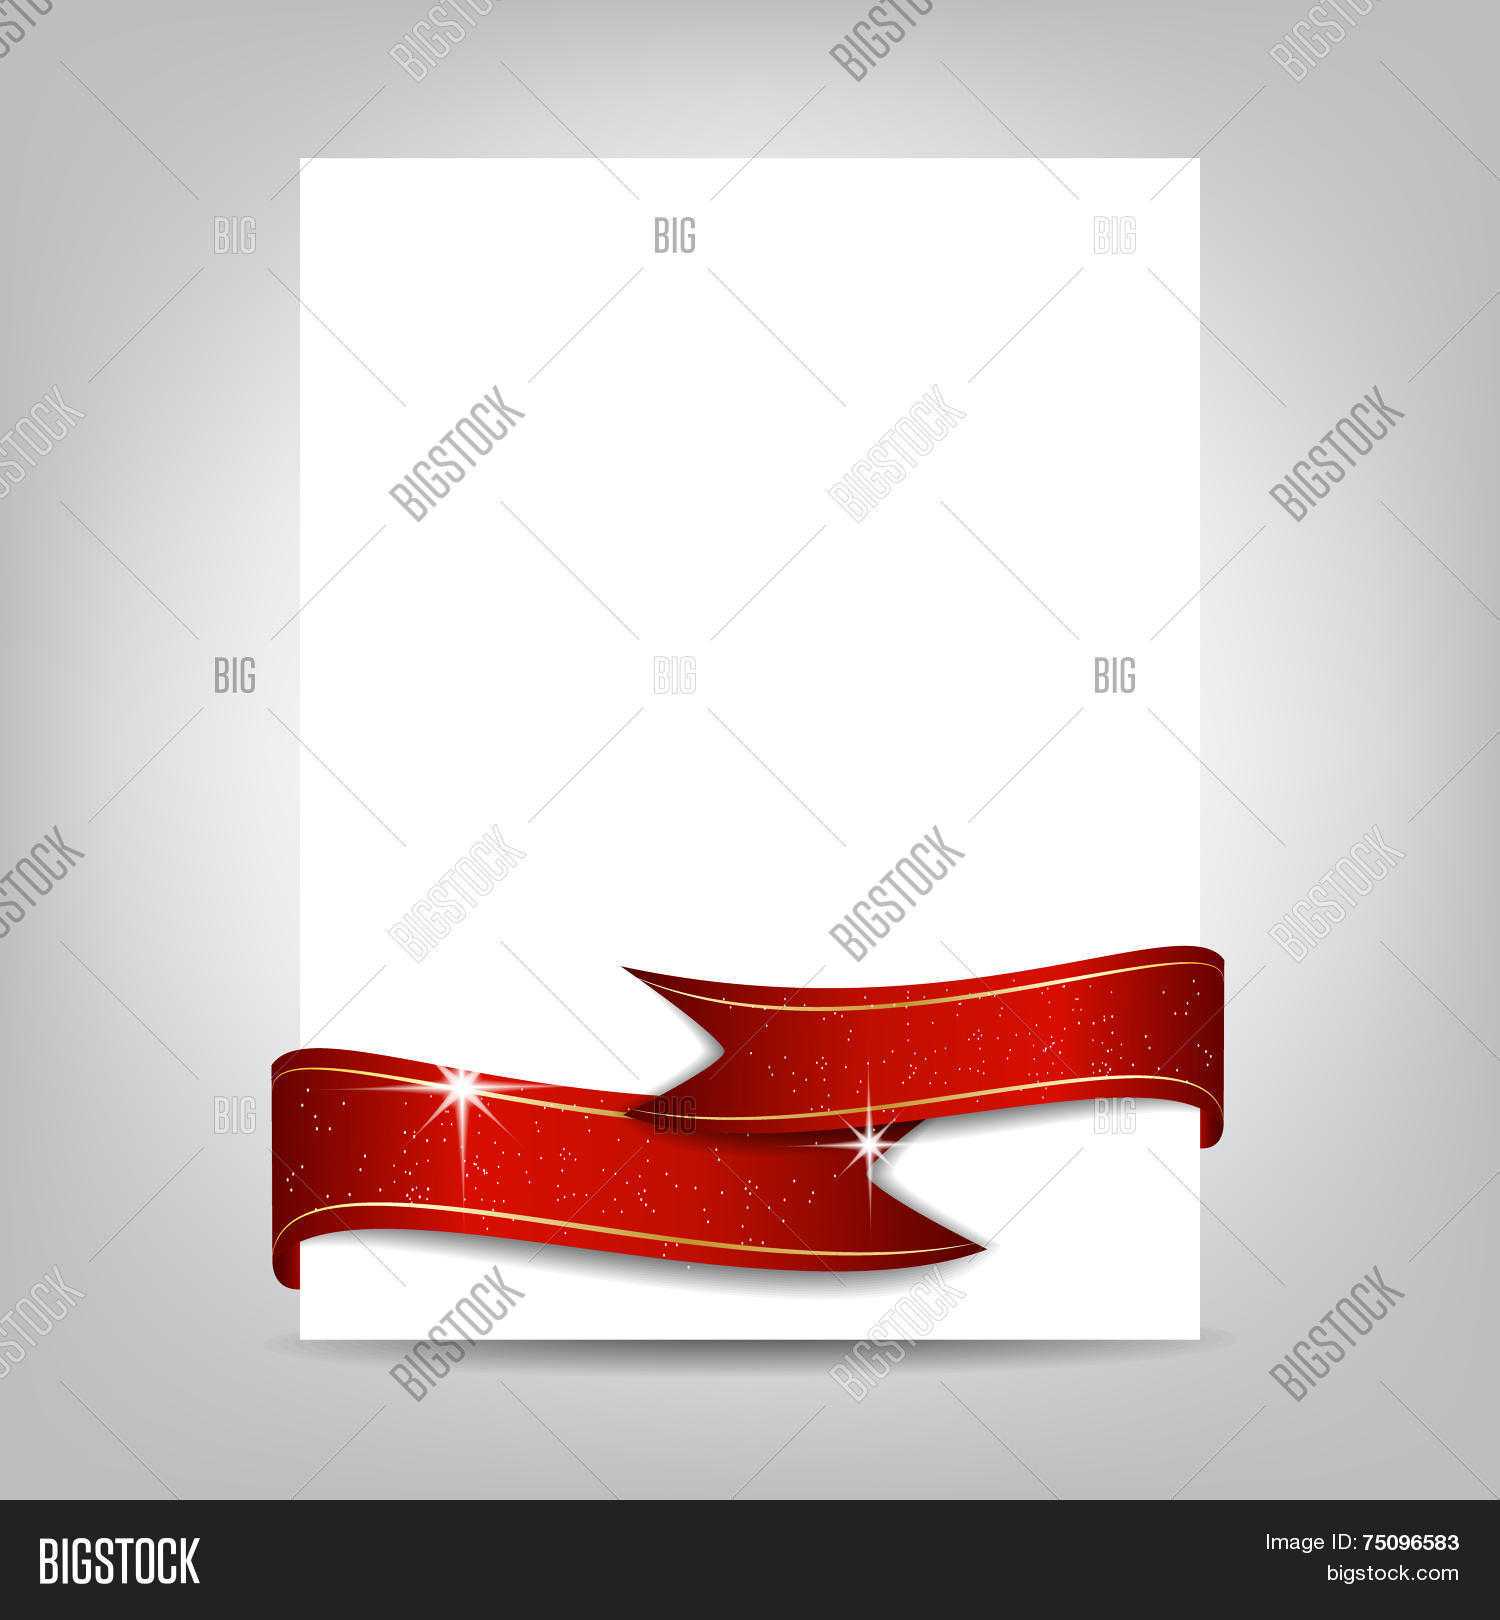 Christmas Flyer Vector & Photo (Free Trial) | Bigstock With Christmas Brochure Templates Free